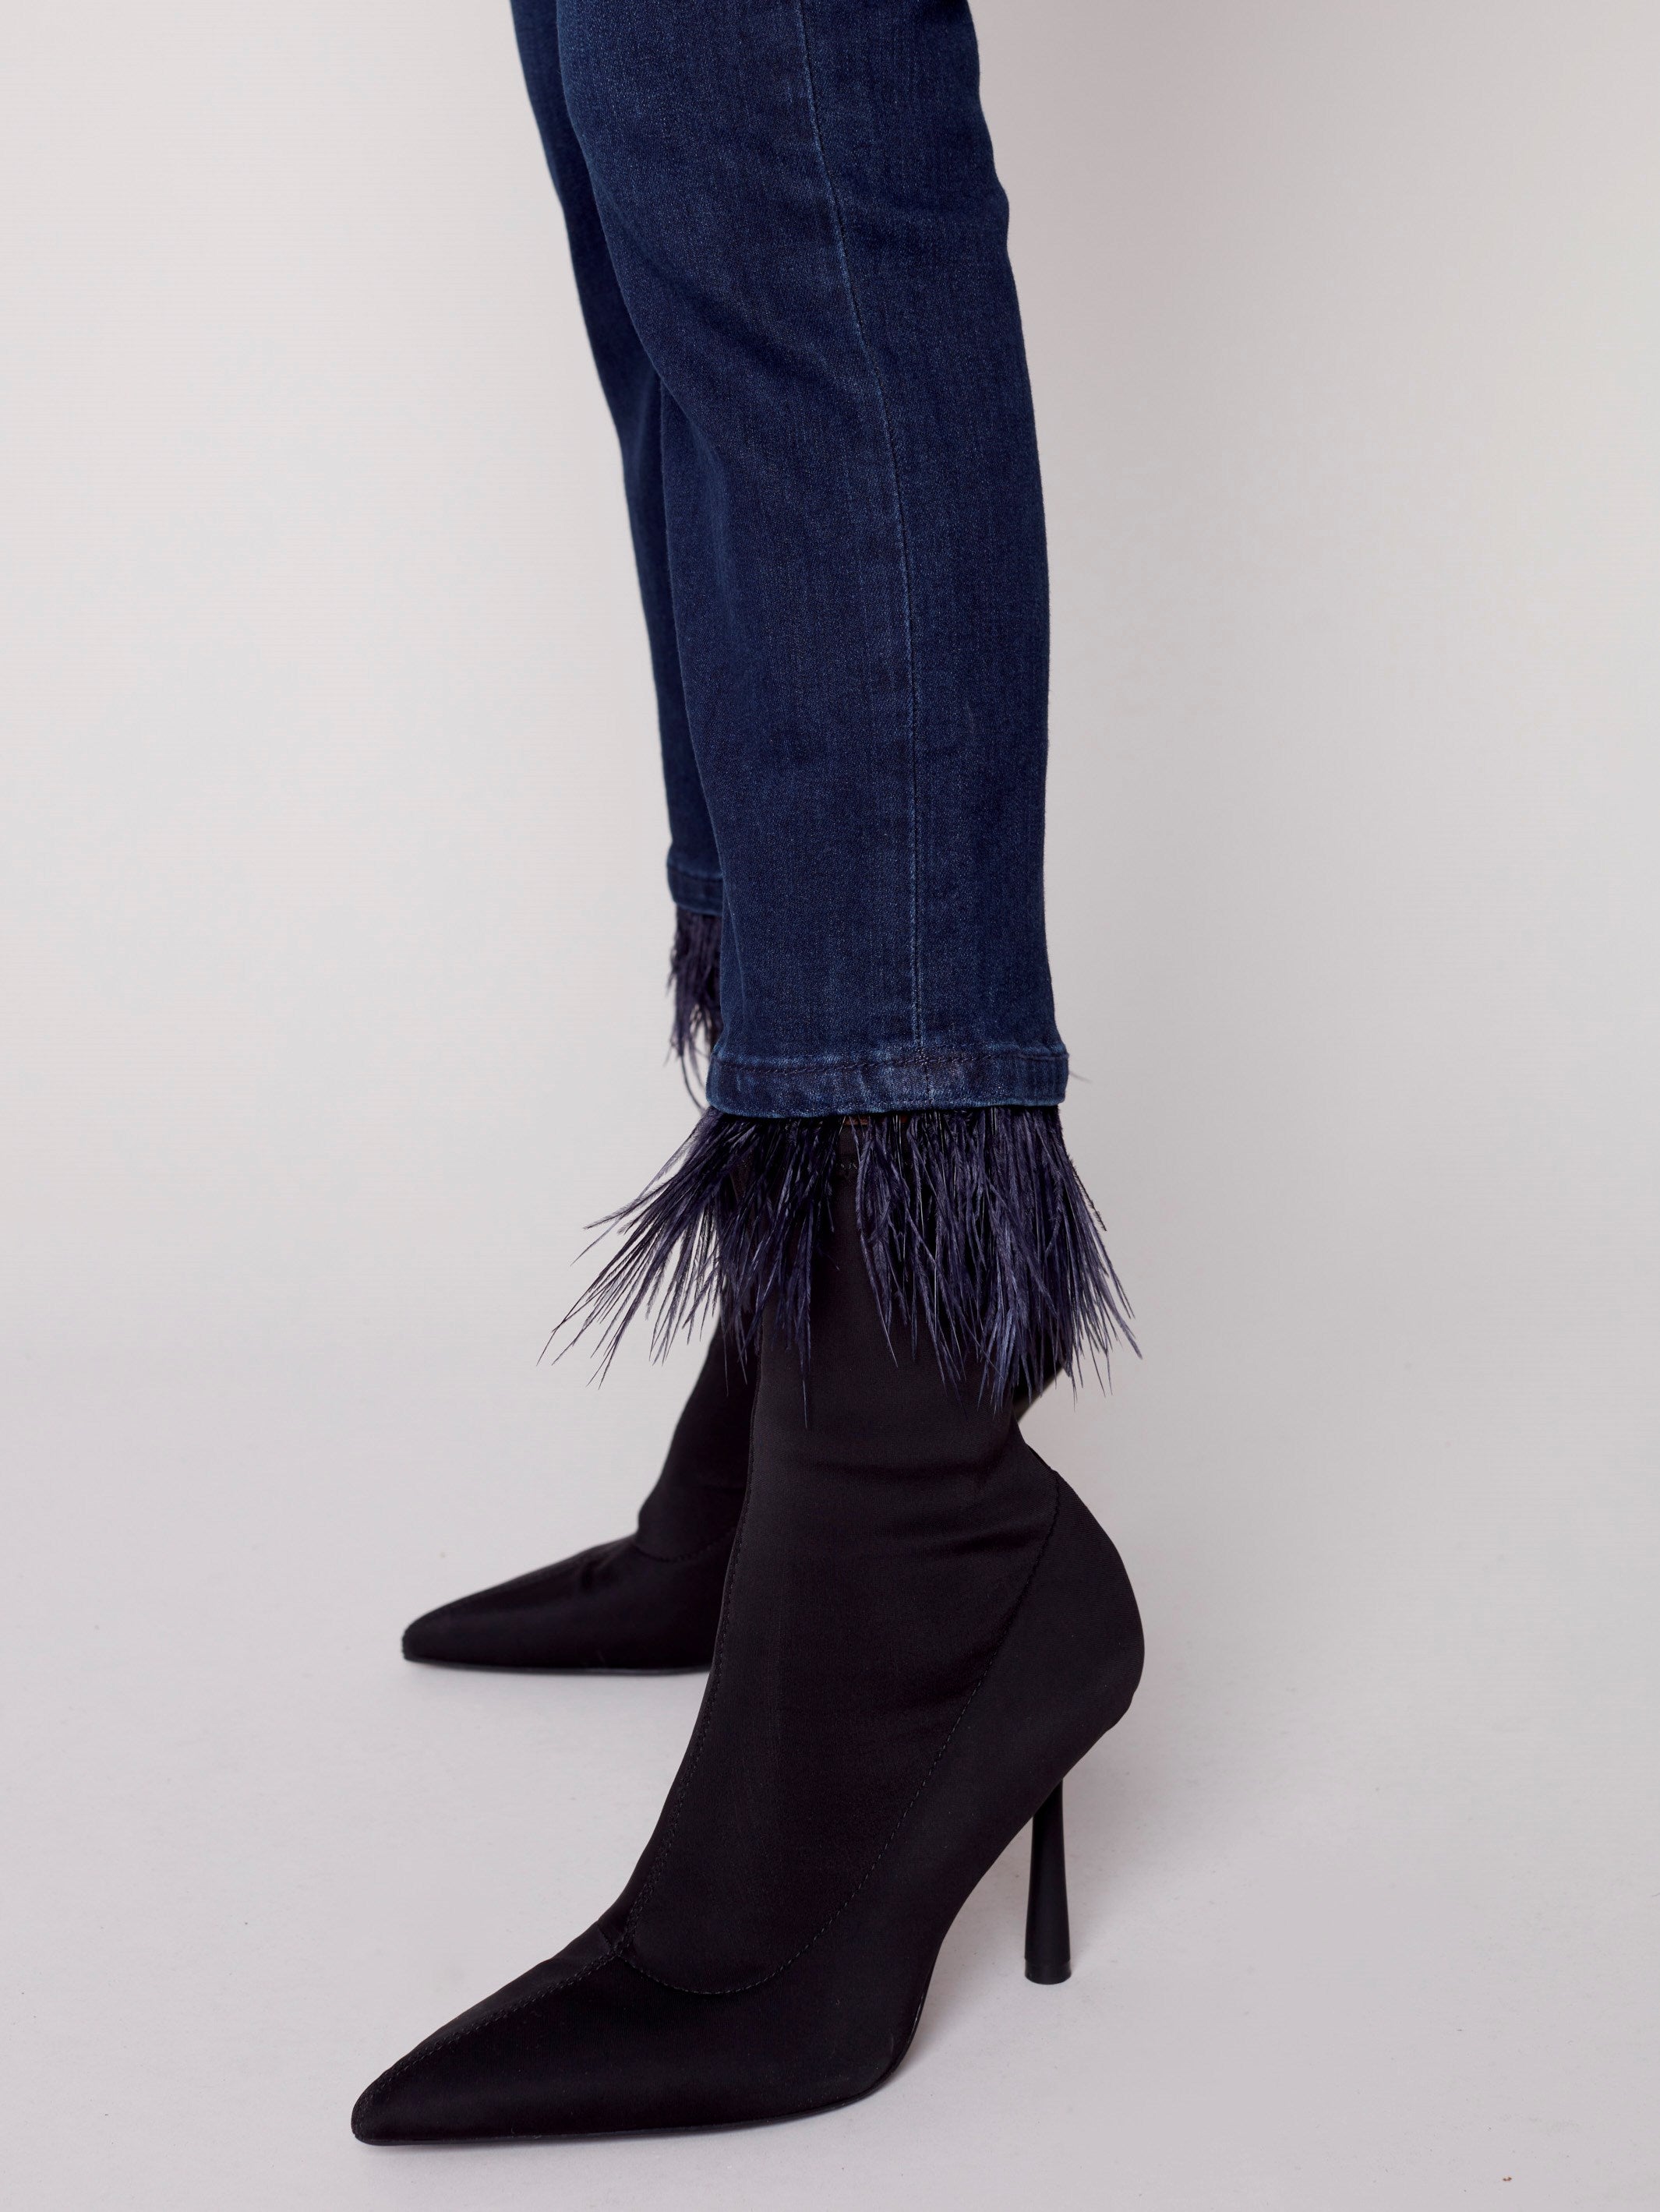 Jeans with Removable Feather Hem - Blue Black